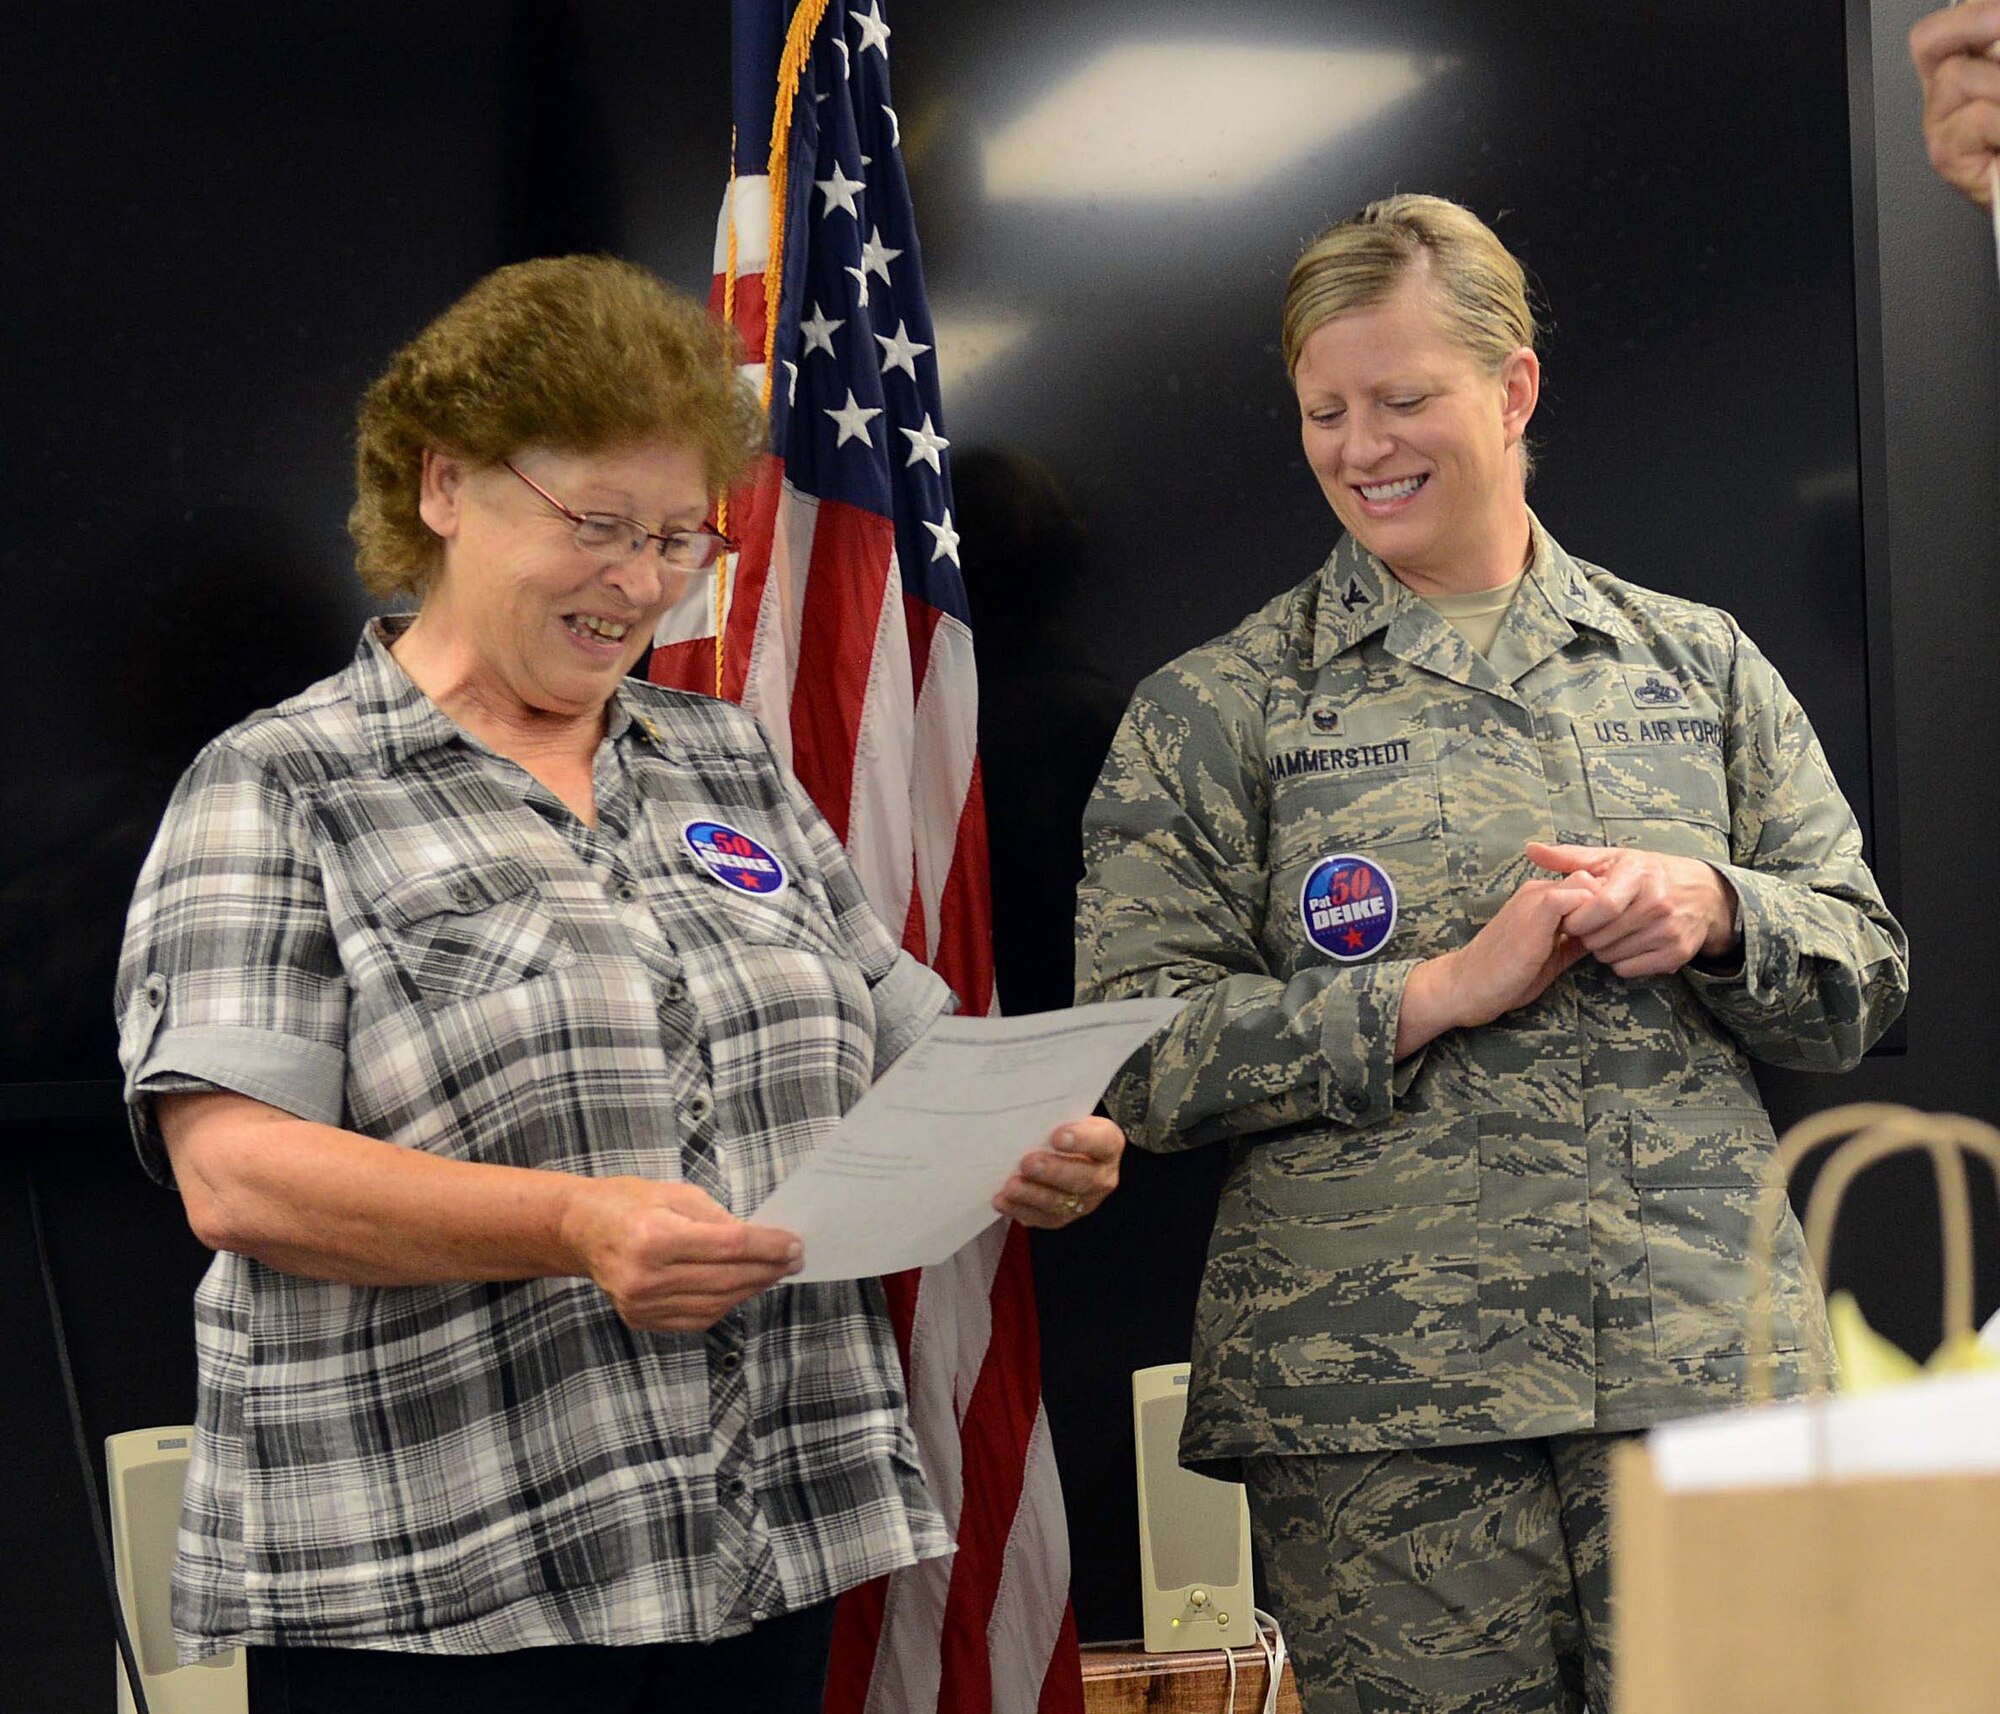 Pat Deike, a 402nd Aircraft Maintenance Group mechanical engineering technician, receives a 50 year service award from Col. Jennifer Hammerstedt, then 402nd AMXG commander. (U.S. Air Force photo by Tommie Horton)